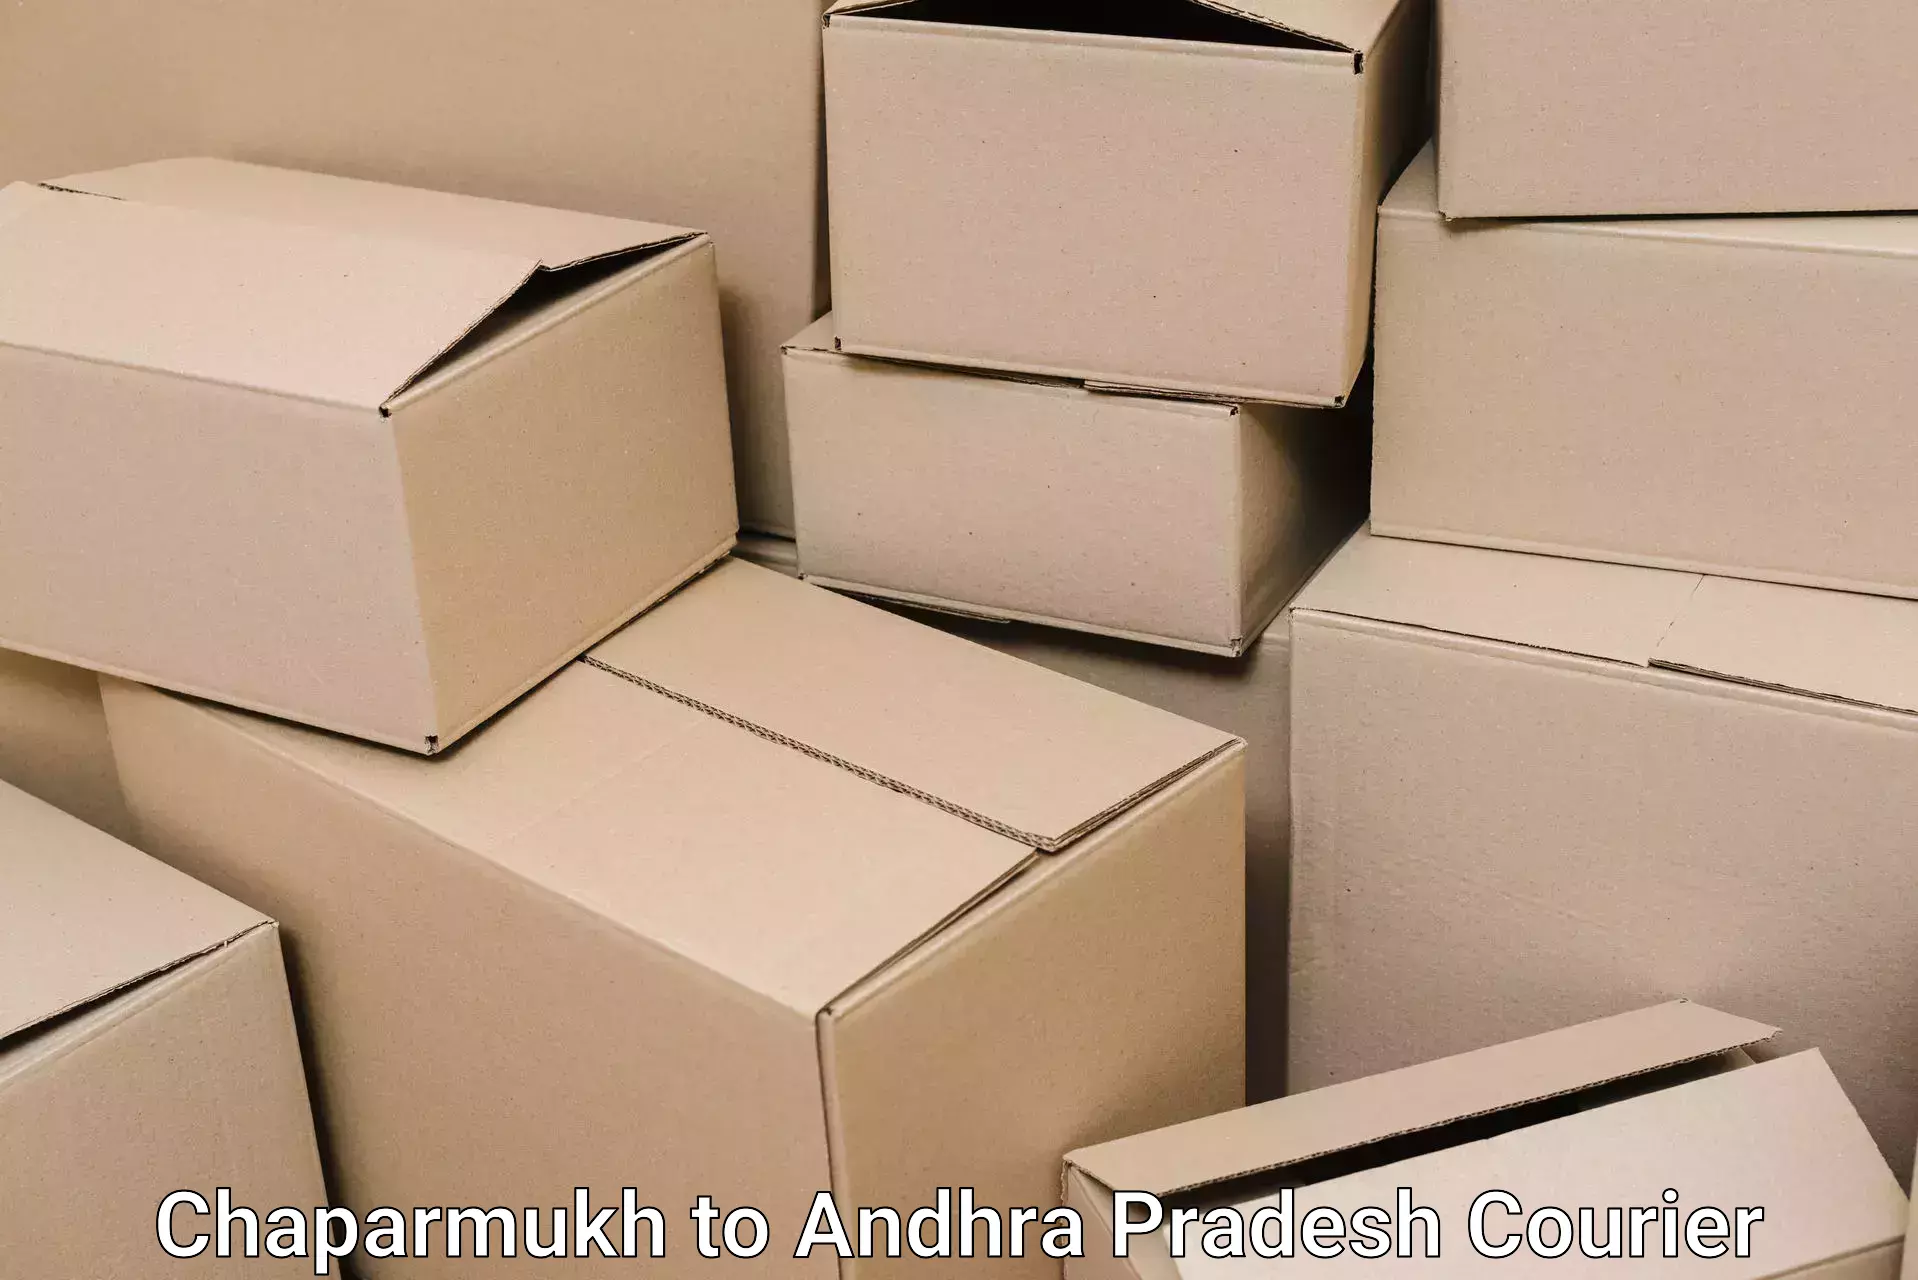 Specialized moving company Chaparmukh to Andhra Pradesh